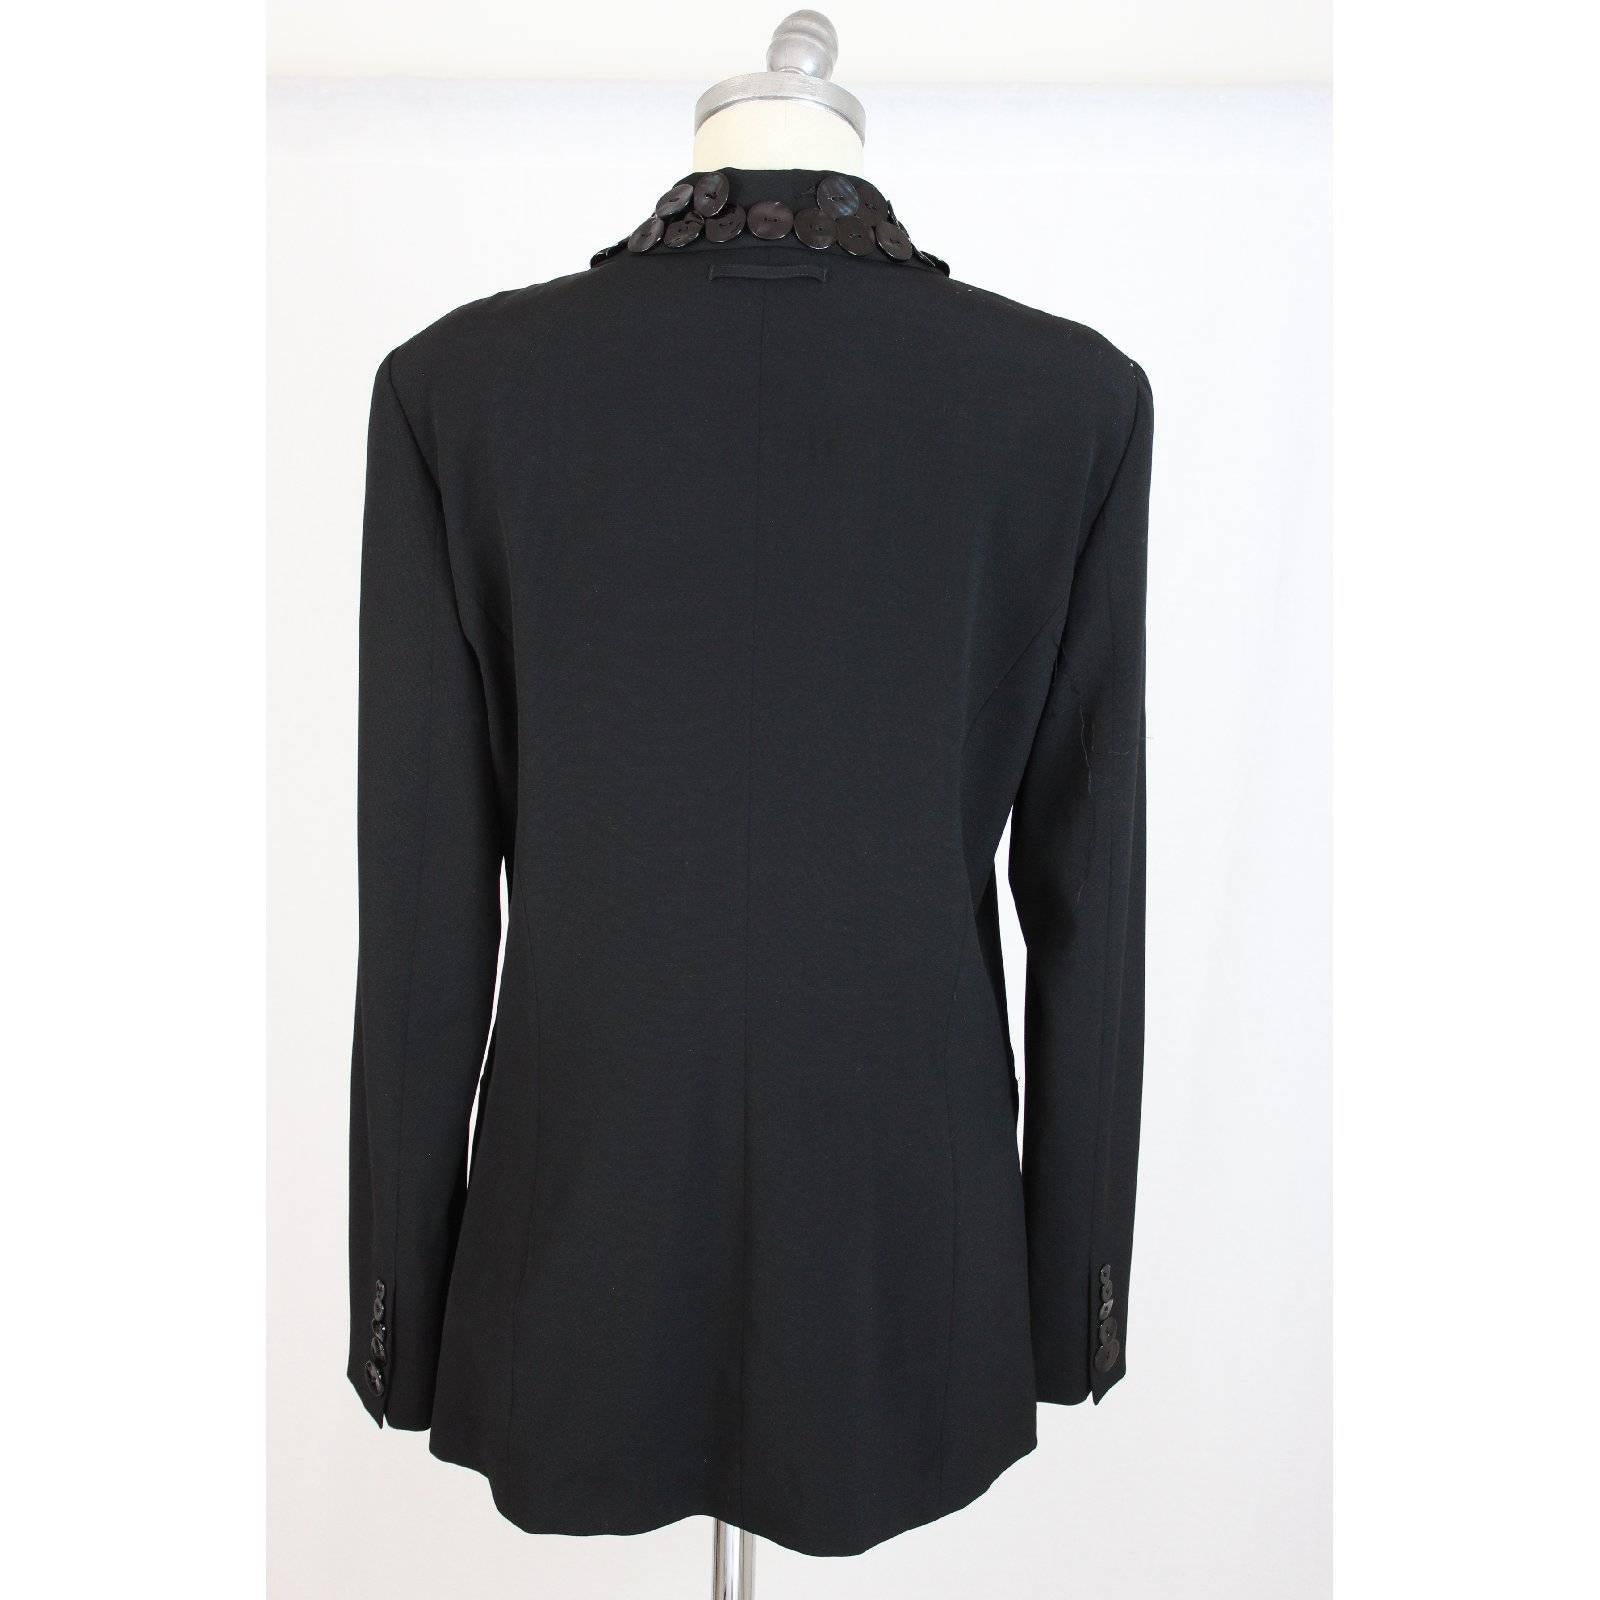 Jean Paul Gualtier vintage black wool jacket. The rever has applied buttons to mother pearl. This makes the jacket unique, a creation of rare high fashion. The size tag is not present. But we can confirm it’s a 12 Us. The jacket is 79 cm long, like